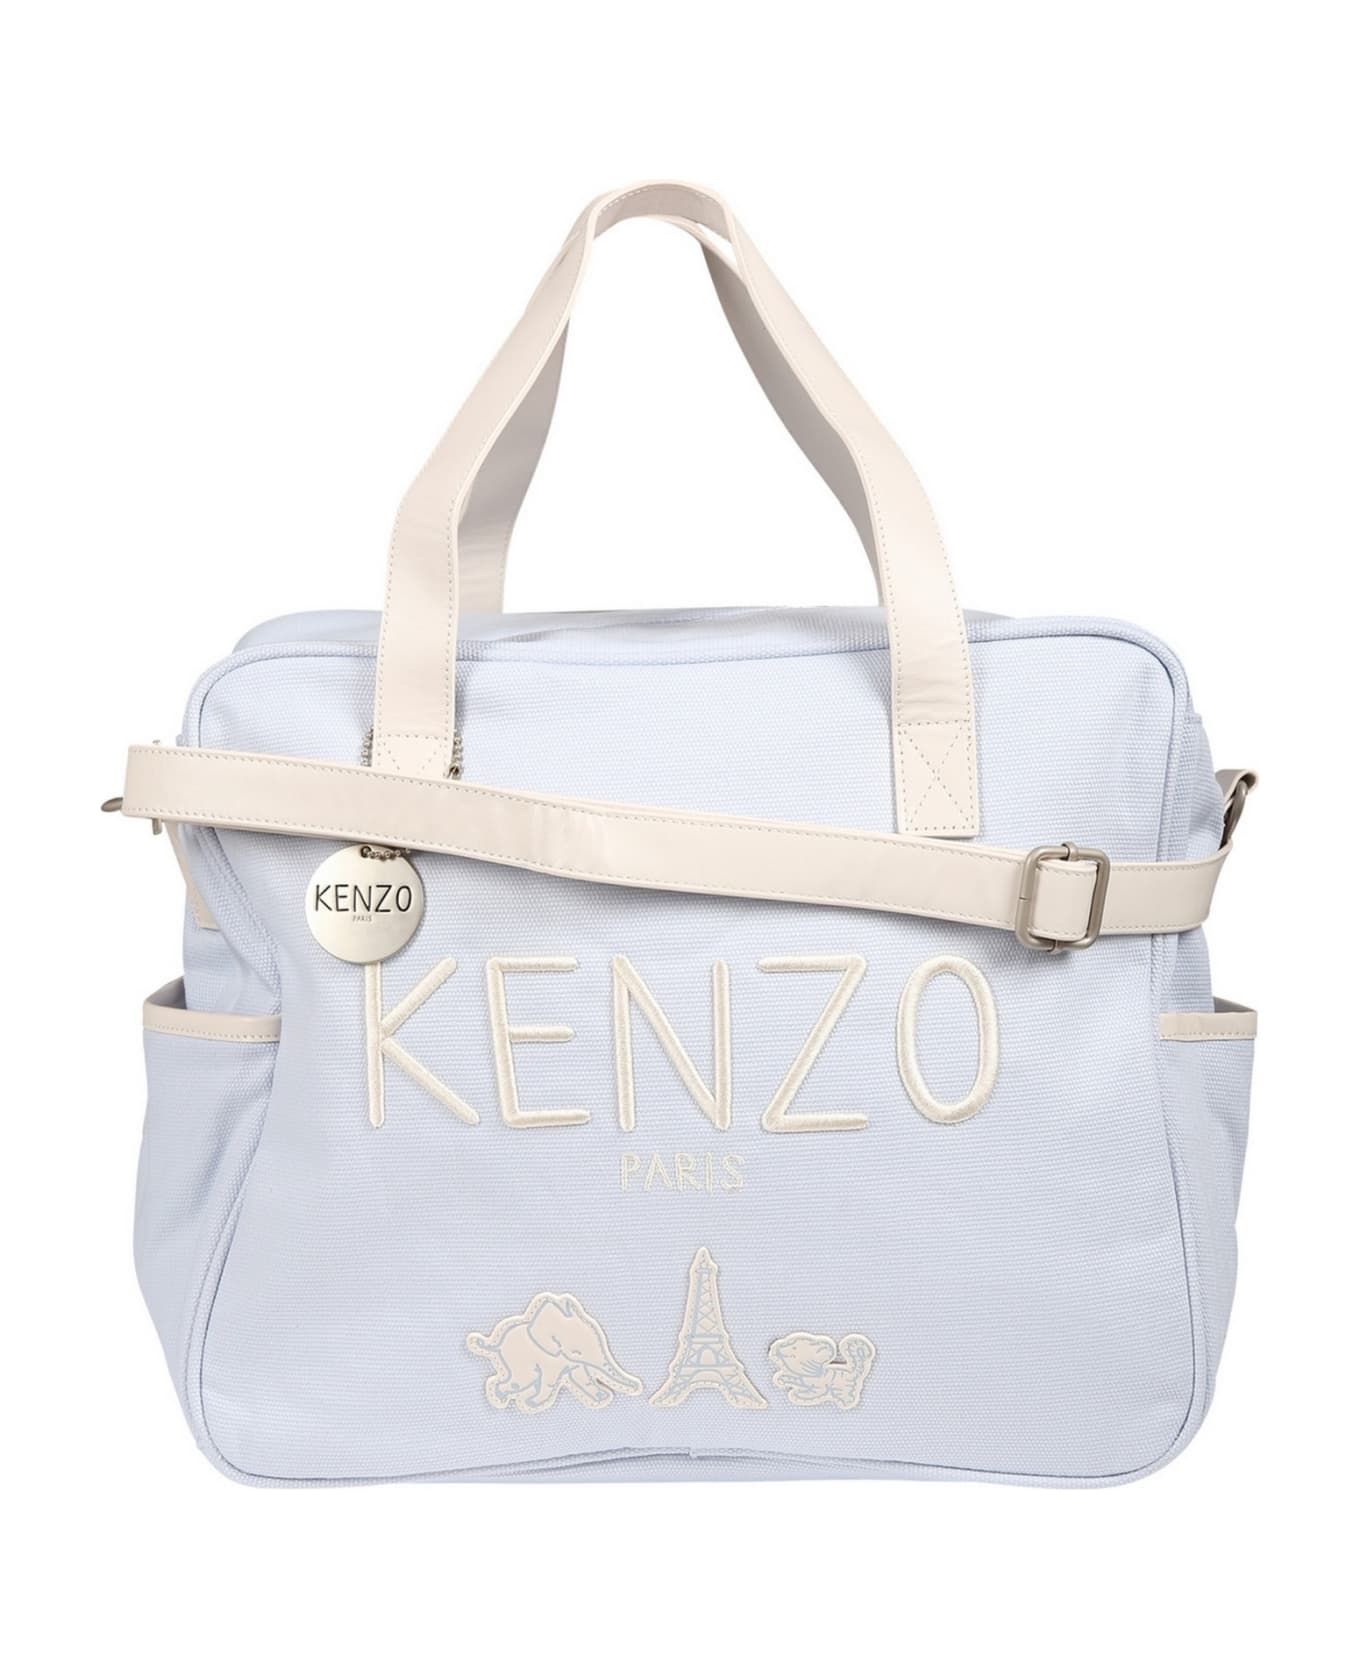 Kenzo Kids Light Blue Changing Bag For Baby Boy With Logo - Light Blue アクセサリー＆ギフト